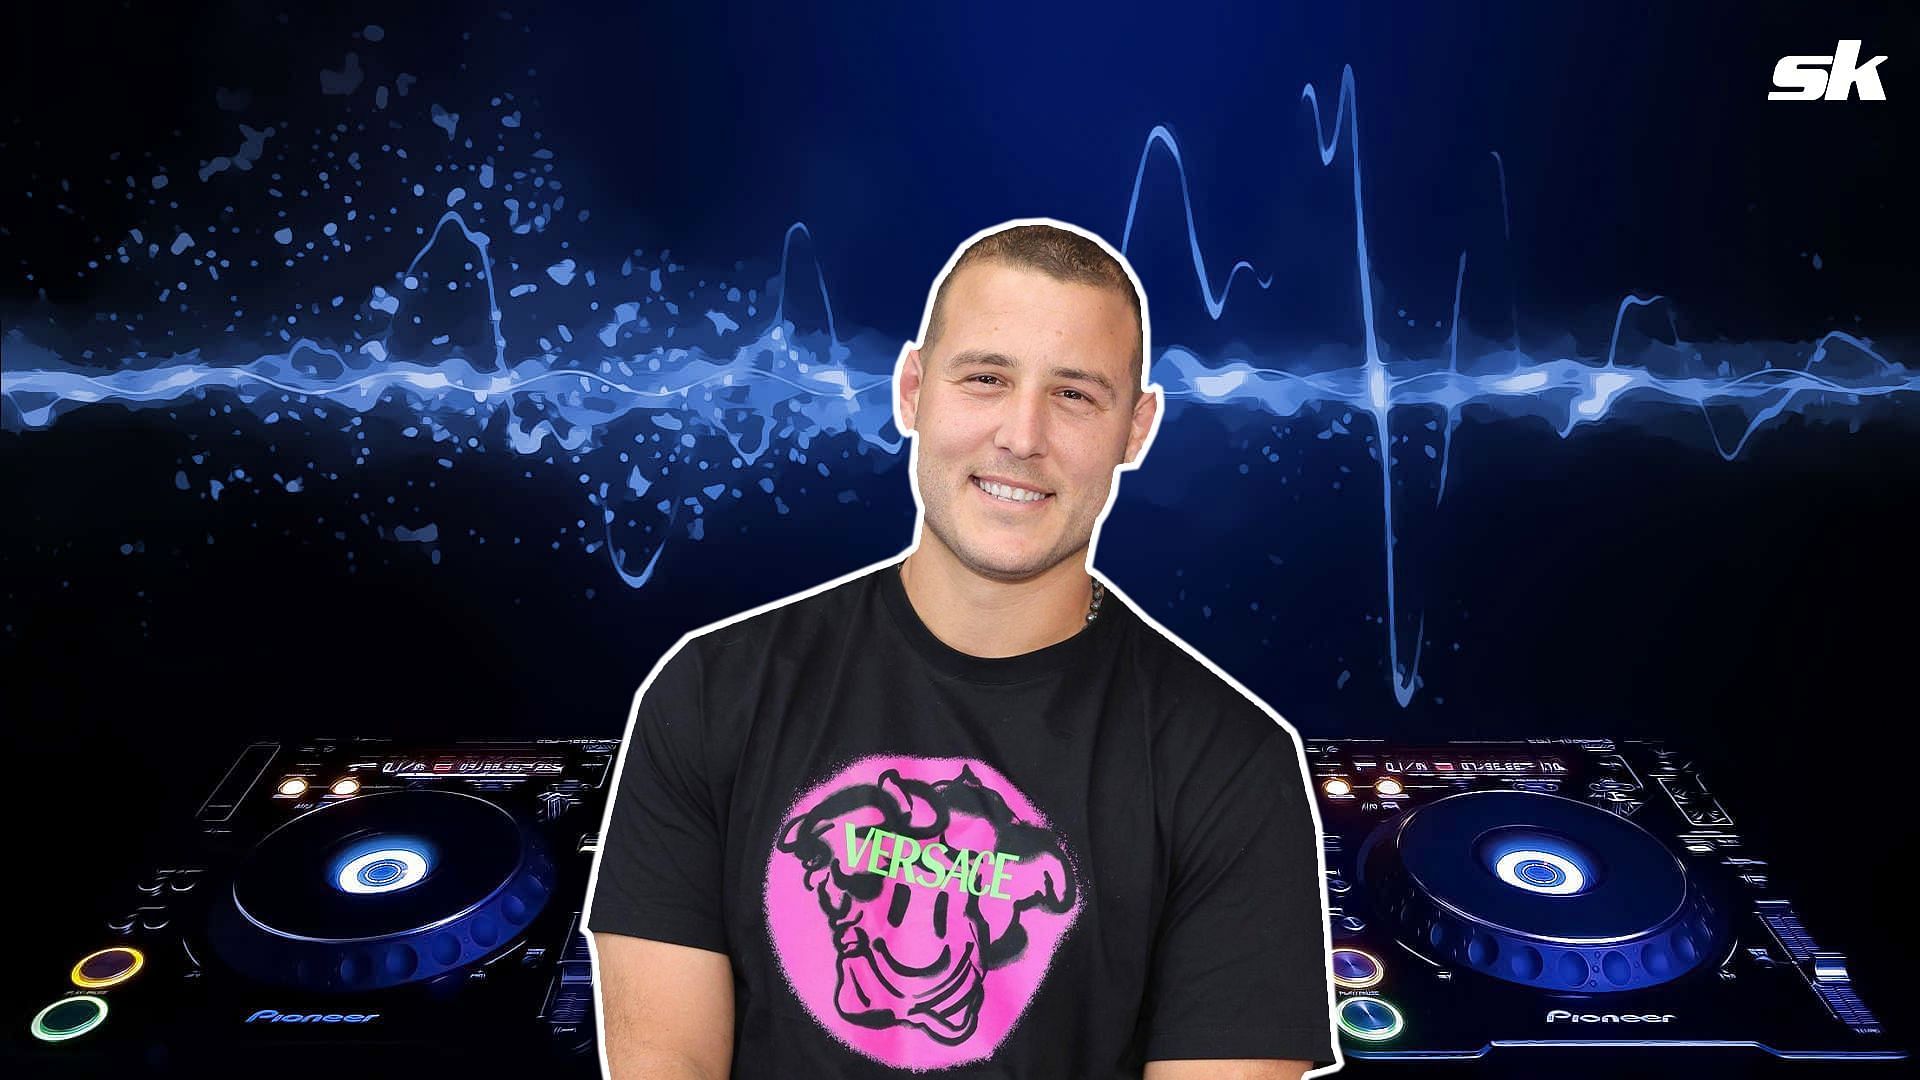 Yankees star Anthony Rizzo was seen playing the DJ.